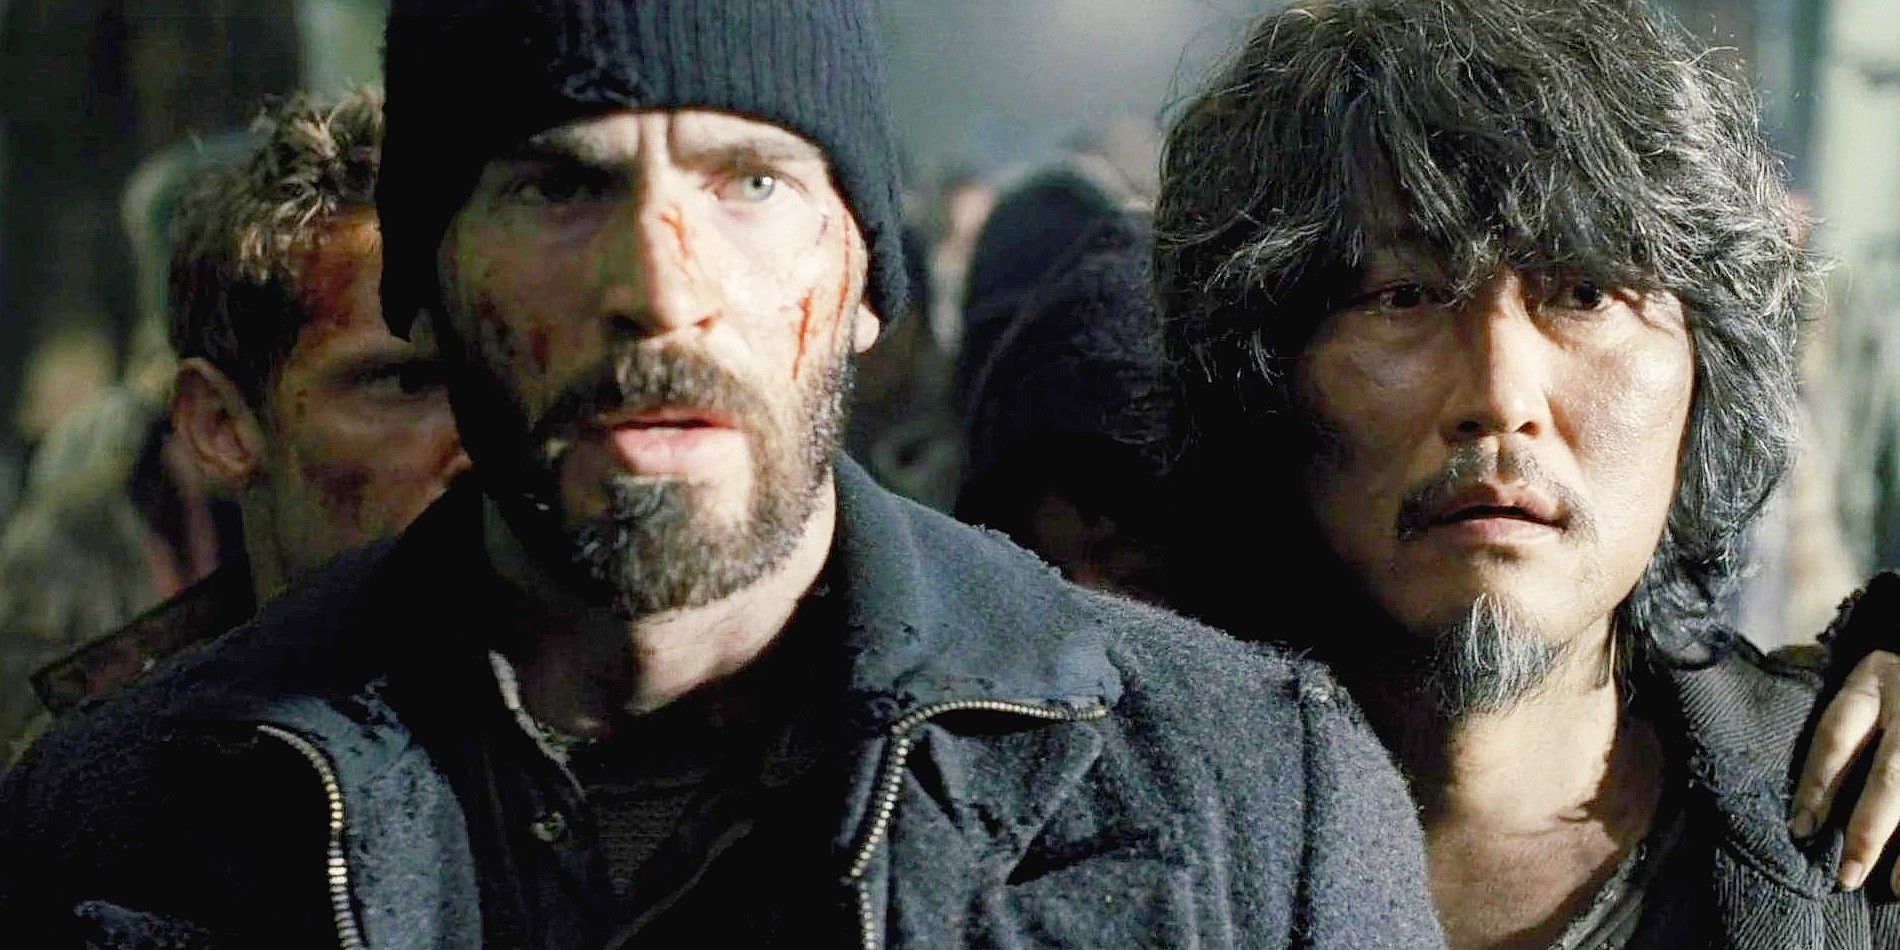 Snowpiercer, directed by Bong Joon-ho, reviewed.